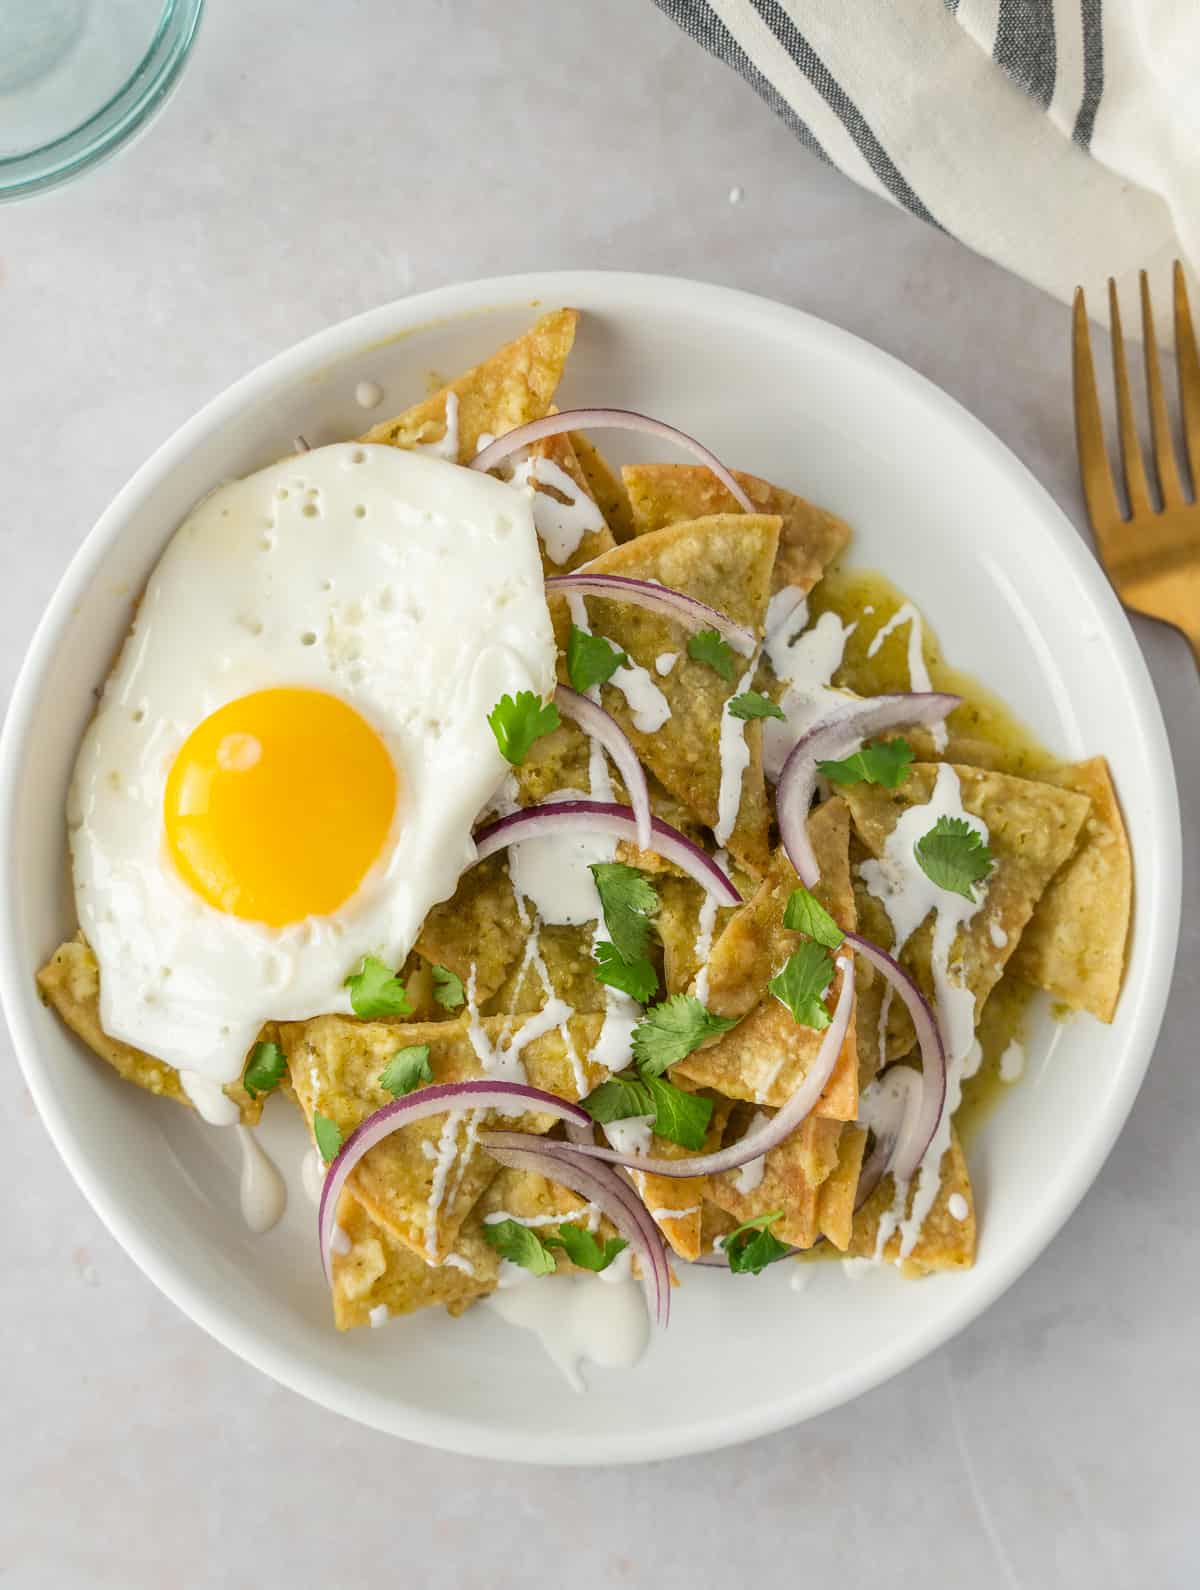 Overhead view of chilaquiles verdes con huevo on a plate garnished with crema, red onions, and cilantro.